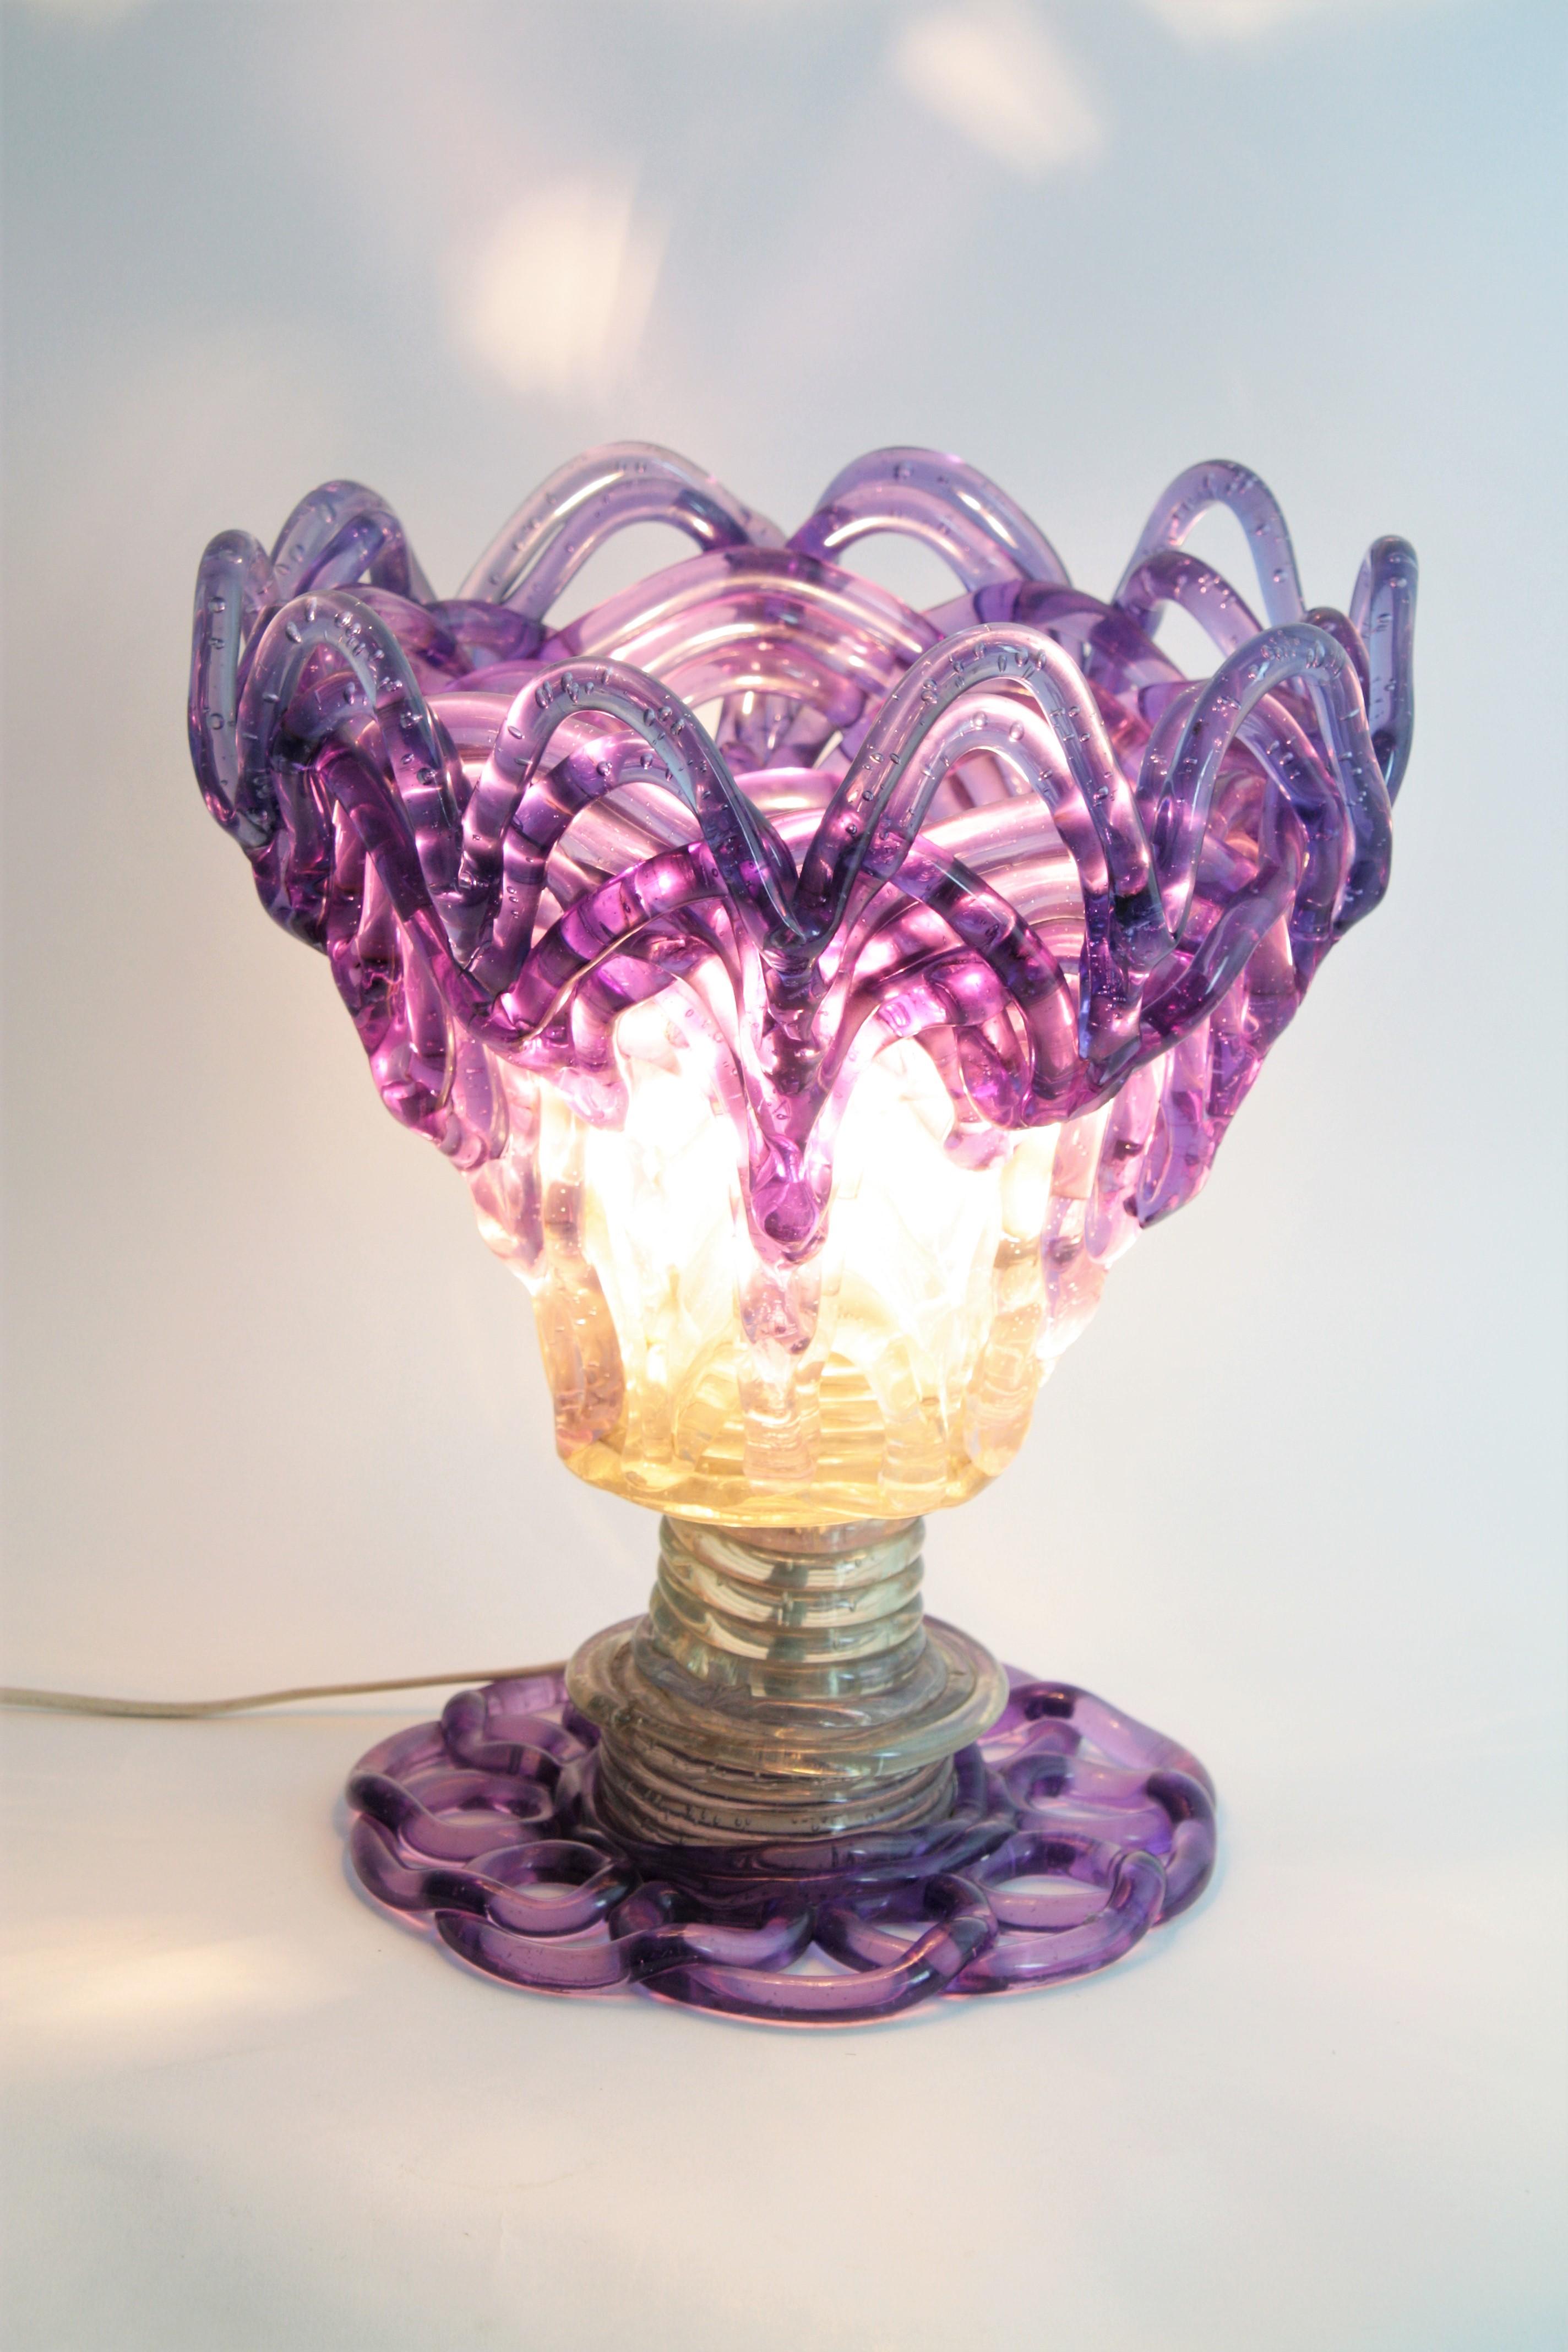 Midcentury table lamp, purple / clear Lucite, Spain, 1960s
This eye-catching uplighter table lamp features an structure made of interlaced cilindric pipes in two colors.
Purple accents at the top and at the bottom.
Rare find.
Measures: 35 cm H x